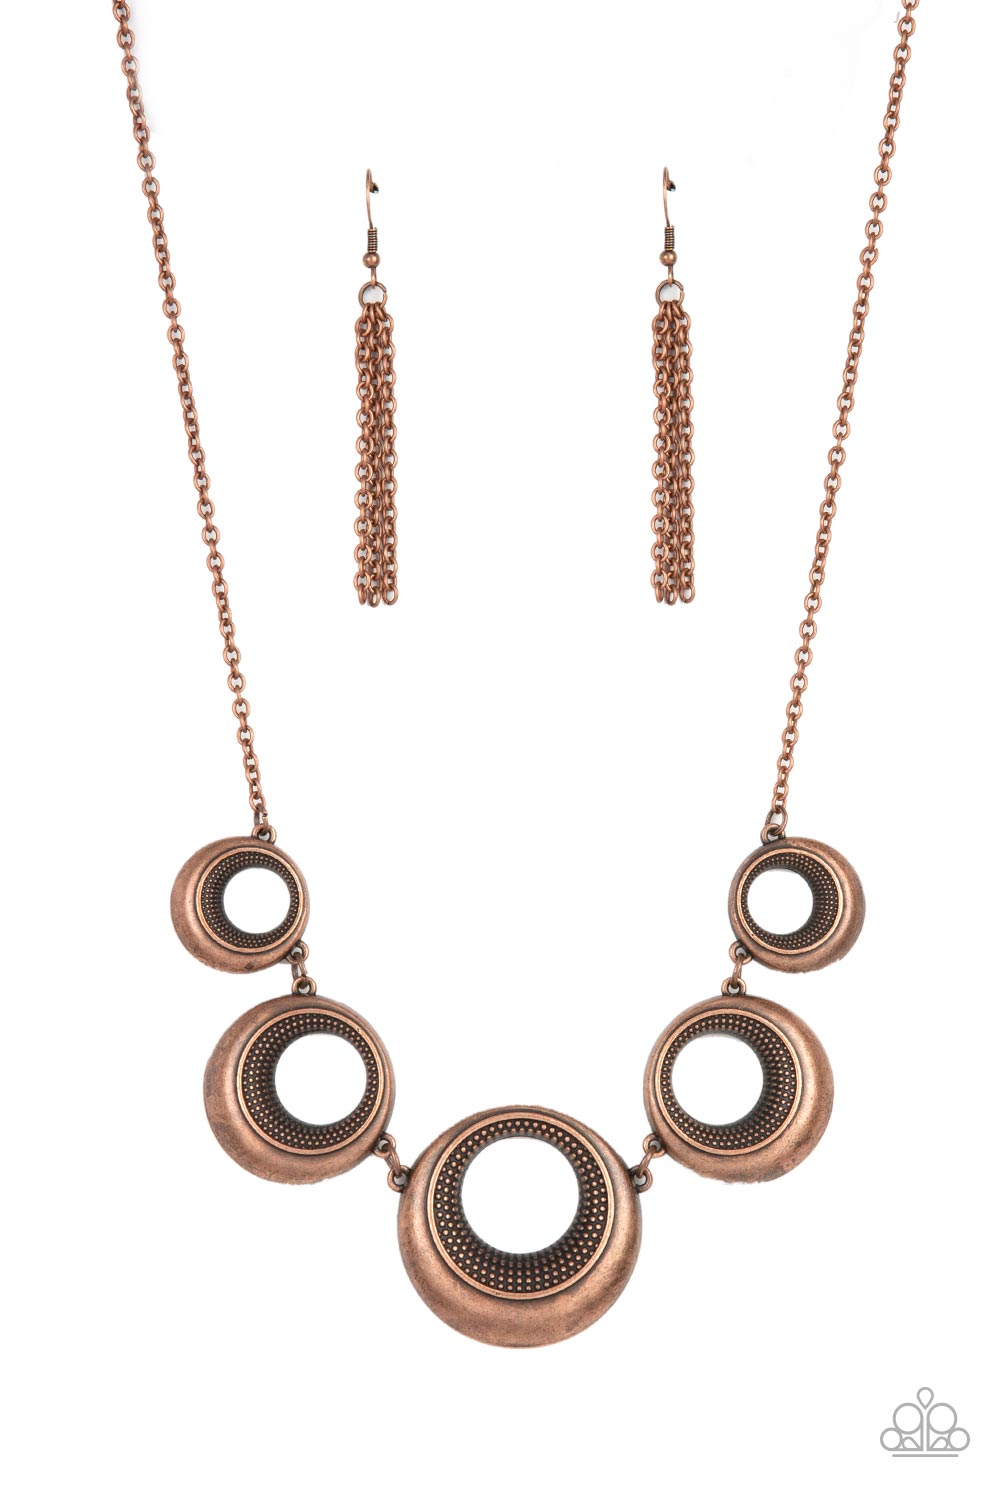 Solar Cycle Copper Necklace - Paparazzi Accessories  Featuring studded centers, an antiqued collection of beveled copper hoops gradually increase in size as they link below the collar for a bold metallic look. Features an adjustable clasp closure.  Sold as one individual necklace. Includes one pair of matching earrings.